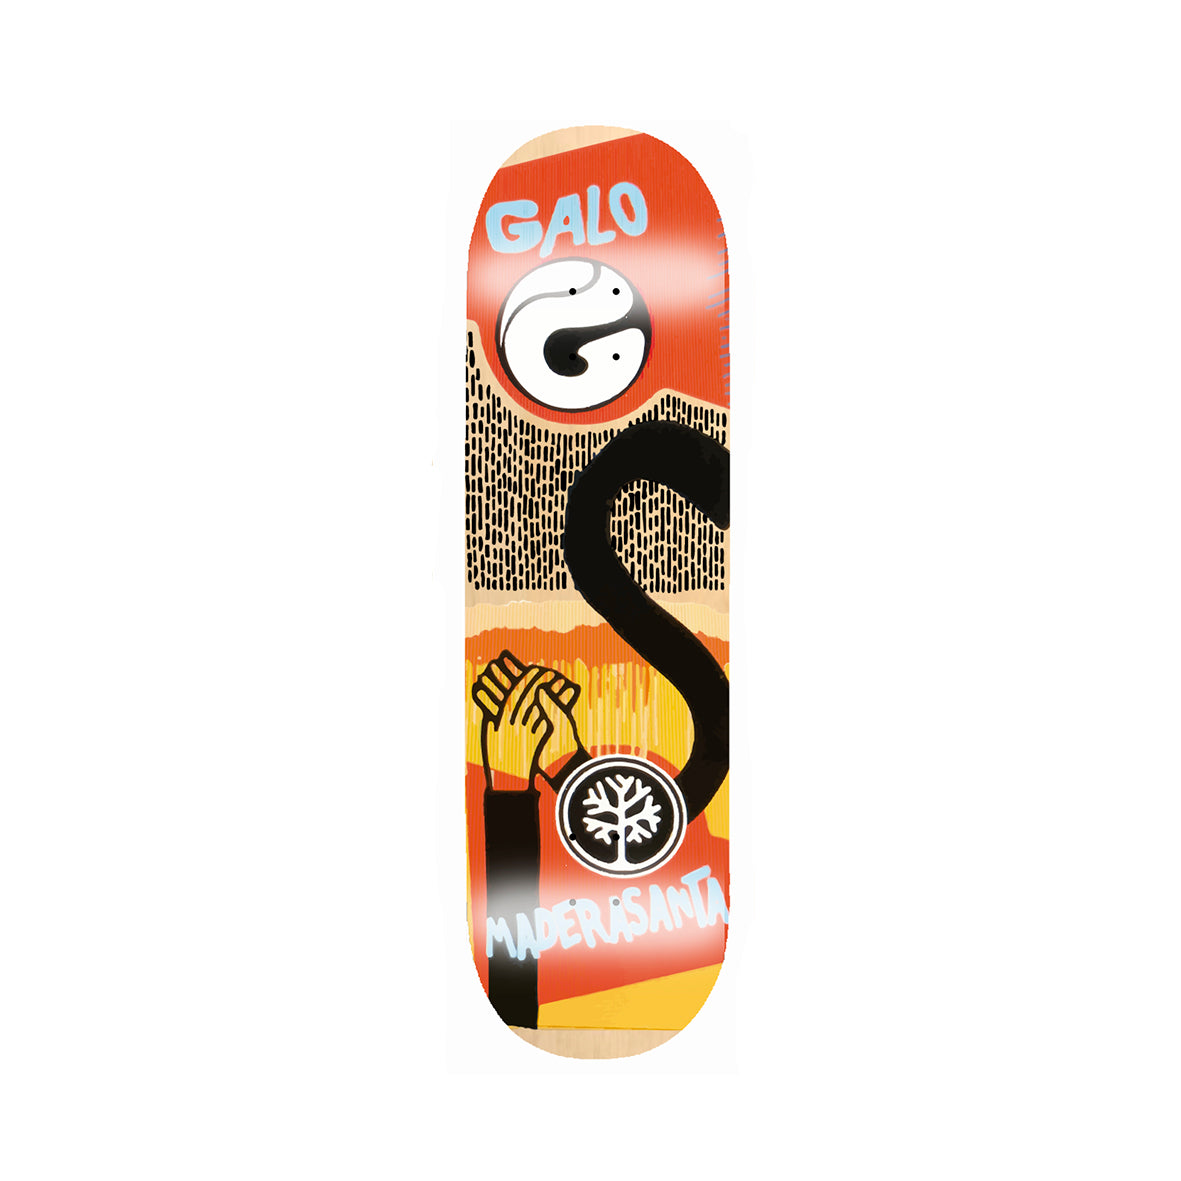 Deck New Series - Galo x MS